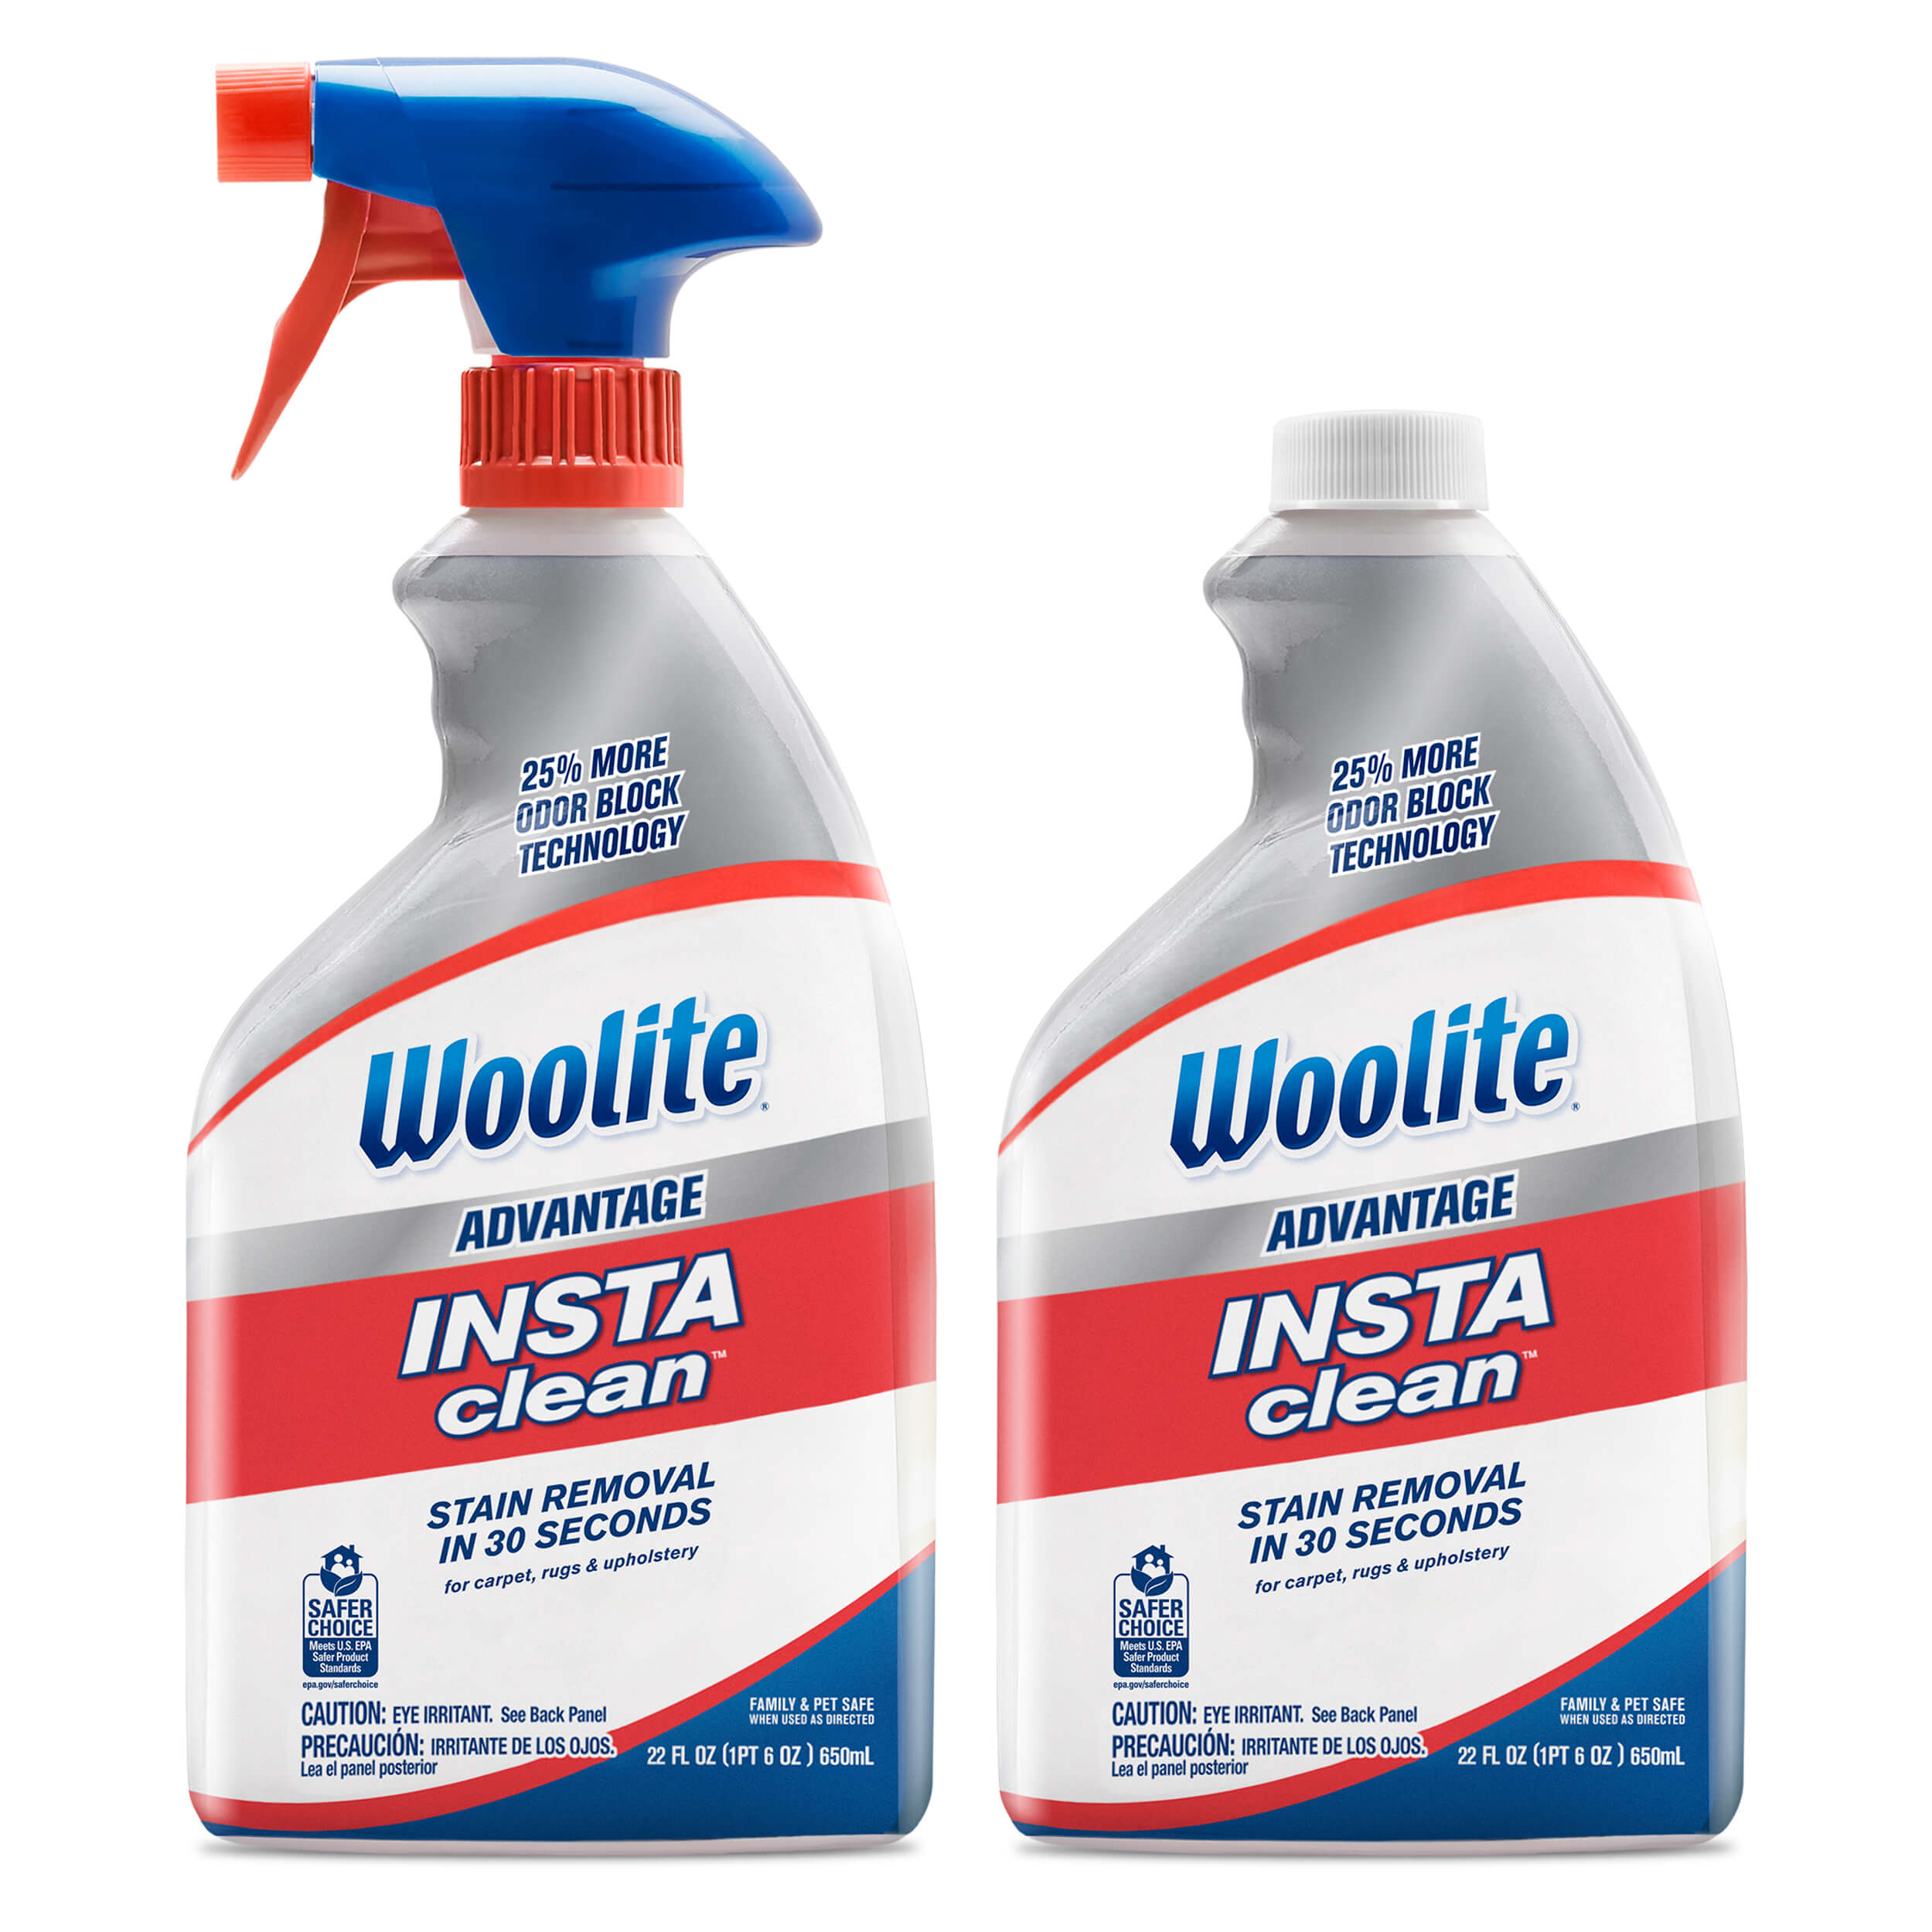 Woolite® Advantage INSTAclean® Stain Remover 3321